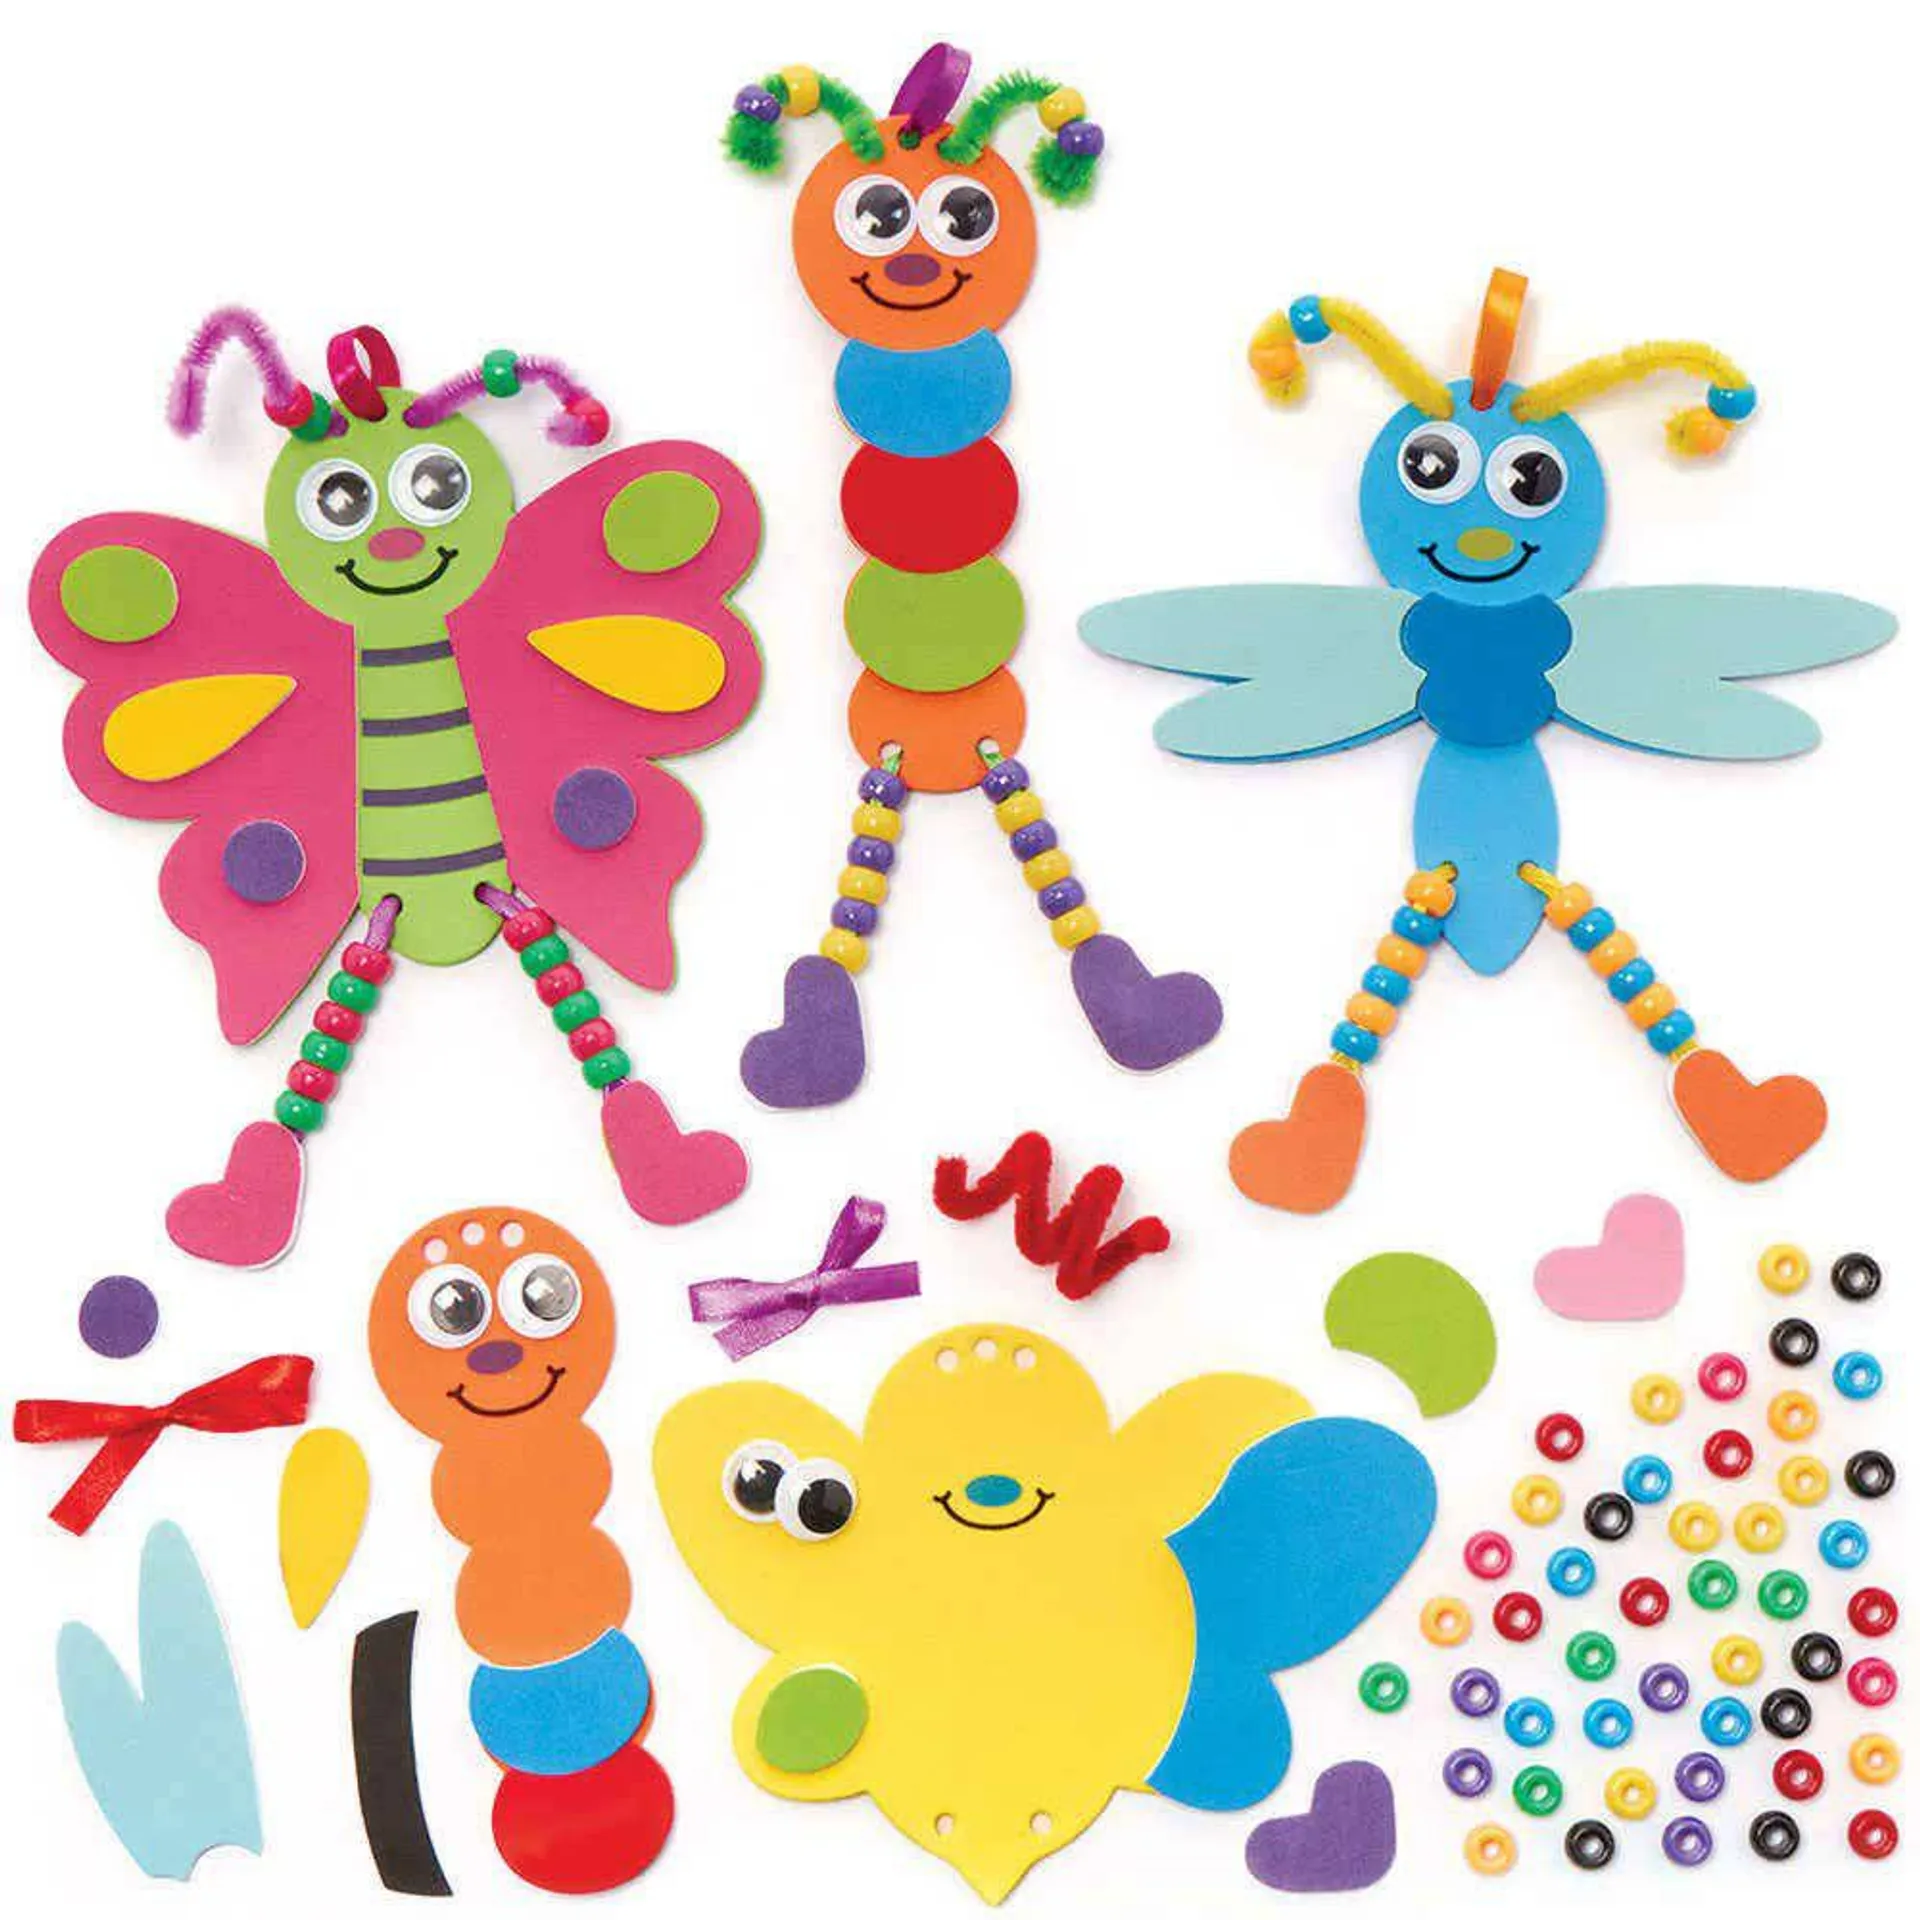 Insect Bug Dangly Legs Decoration Kits